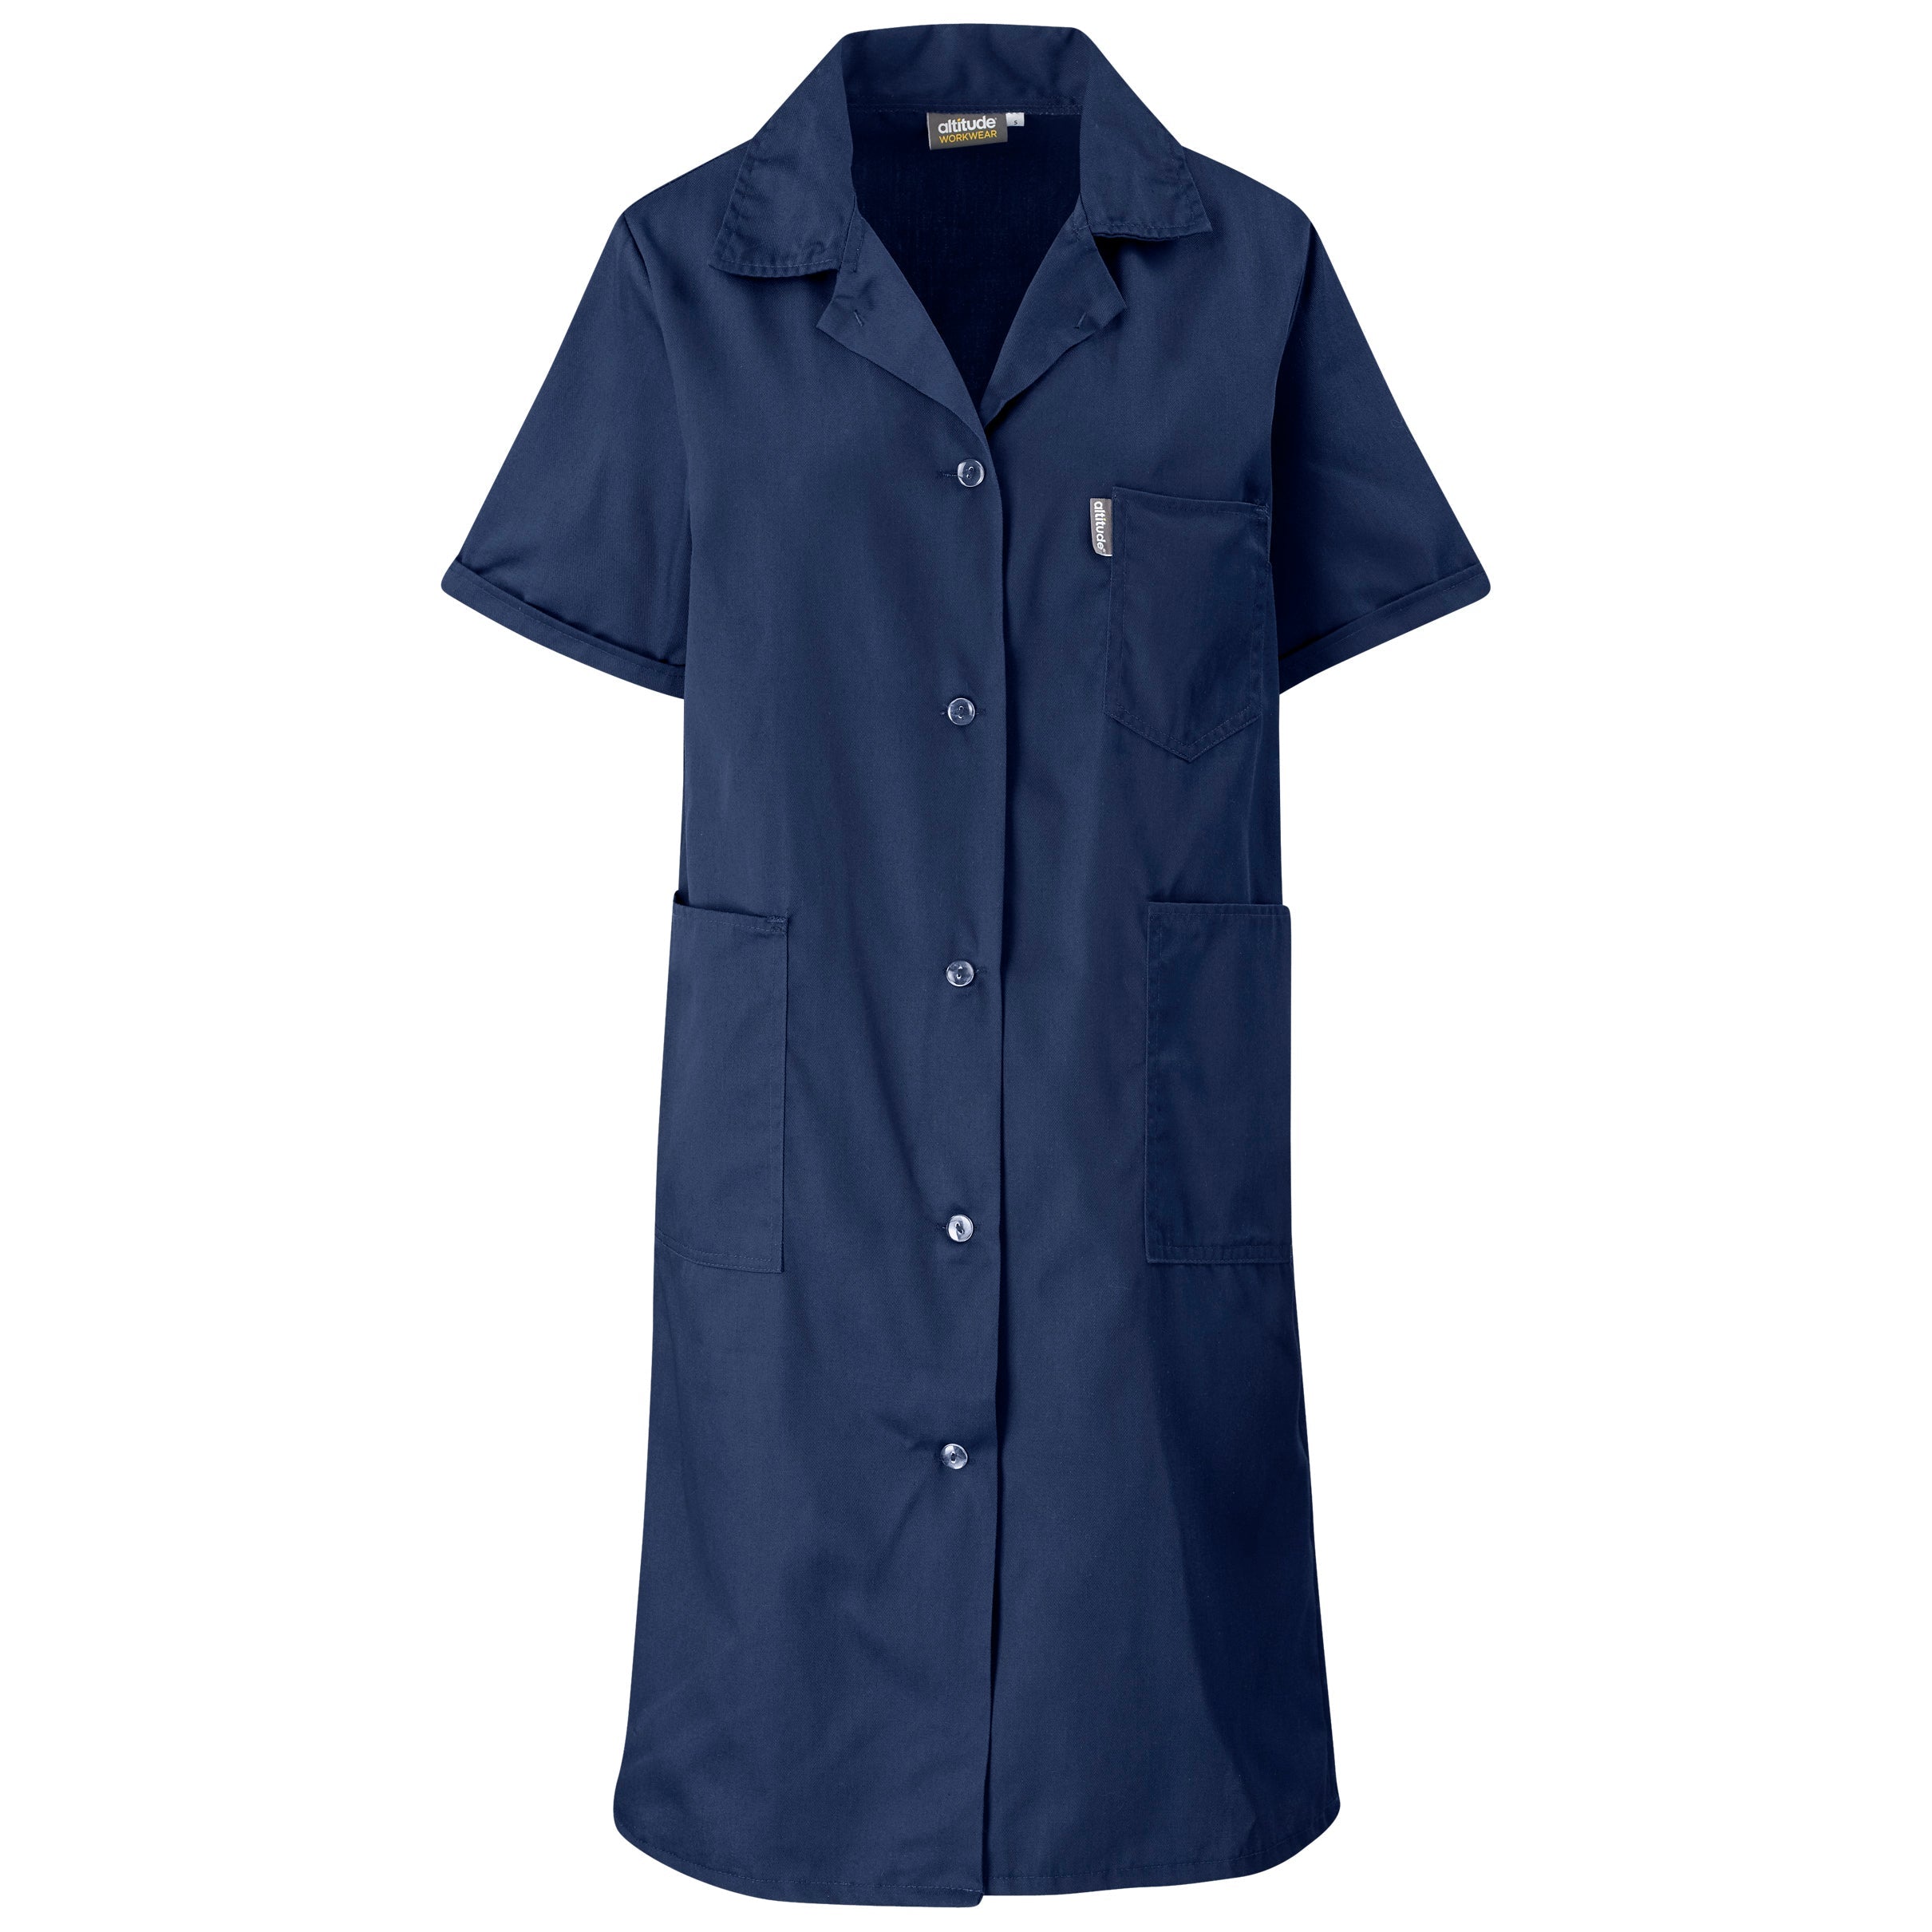 Marriot Polycotton Housecoat-Work Safety Protective Gear-L-Navy-N